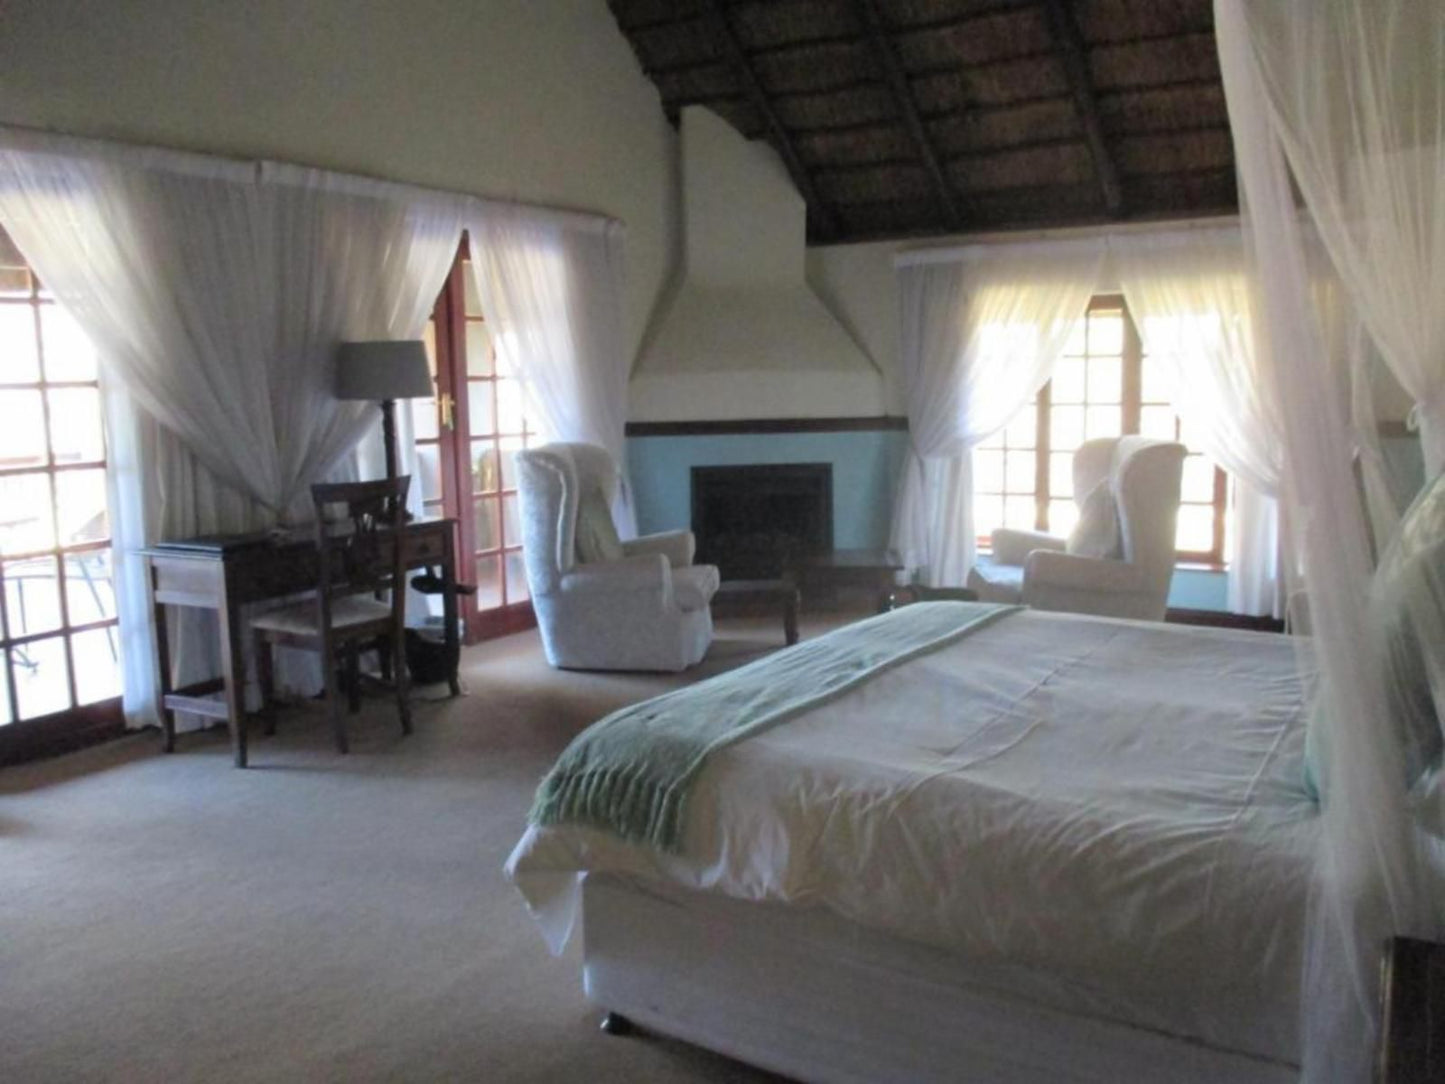 Monchique Guest House And Conference Centre Muldersdrift Gauteng South Africa Unsaturated, Bedroom